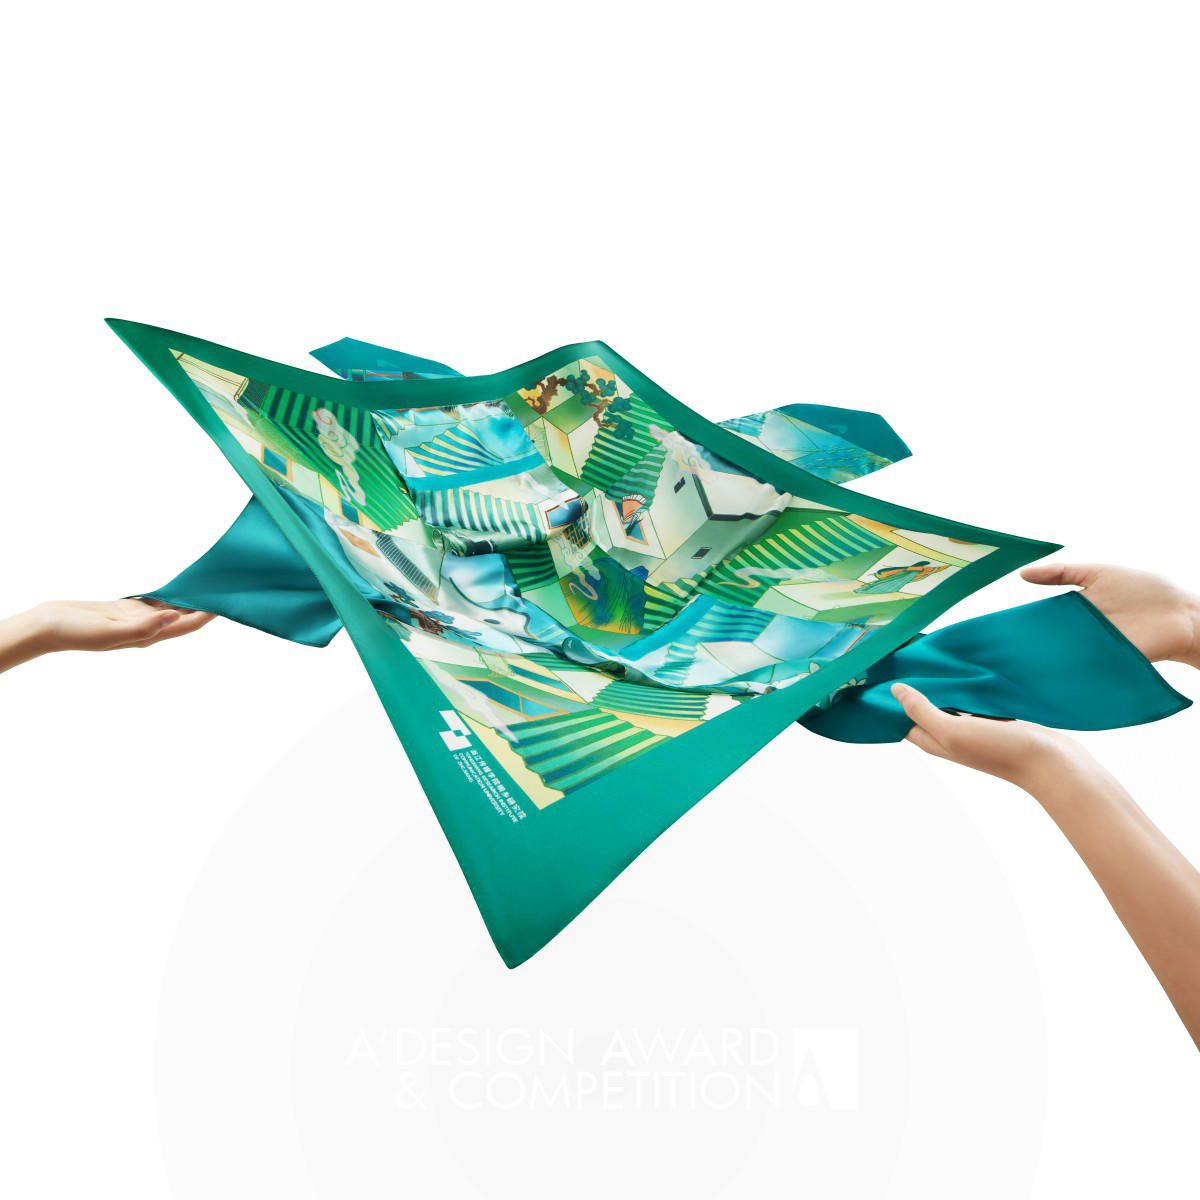 Weaving Interactable Silk Scarf by Ye Feng Iron Textile, Fabric, Textures, Patterns and Cloth Design Award Winner 2023 